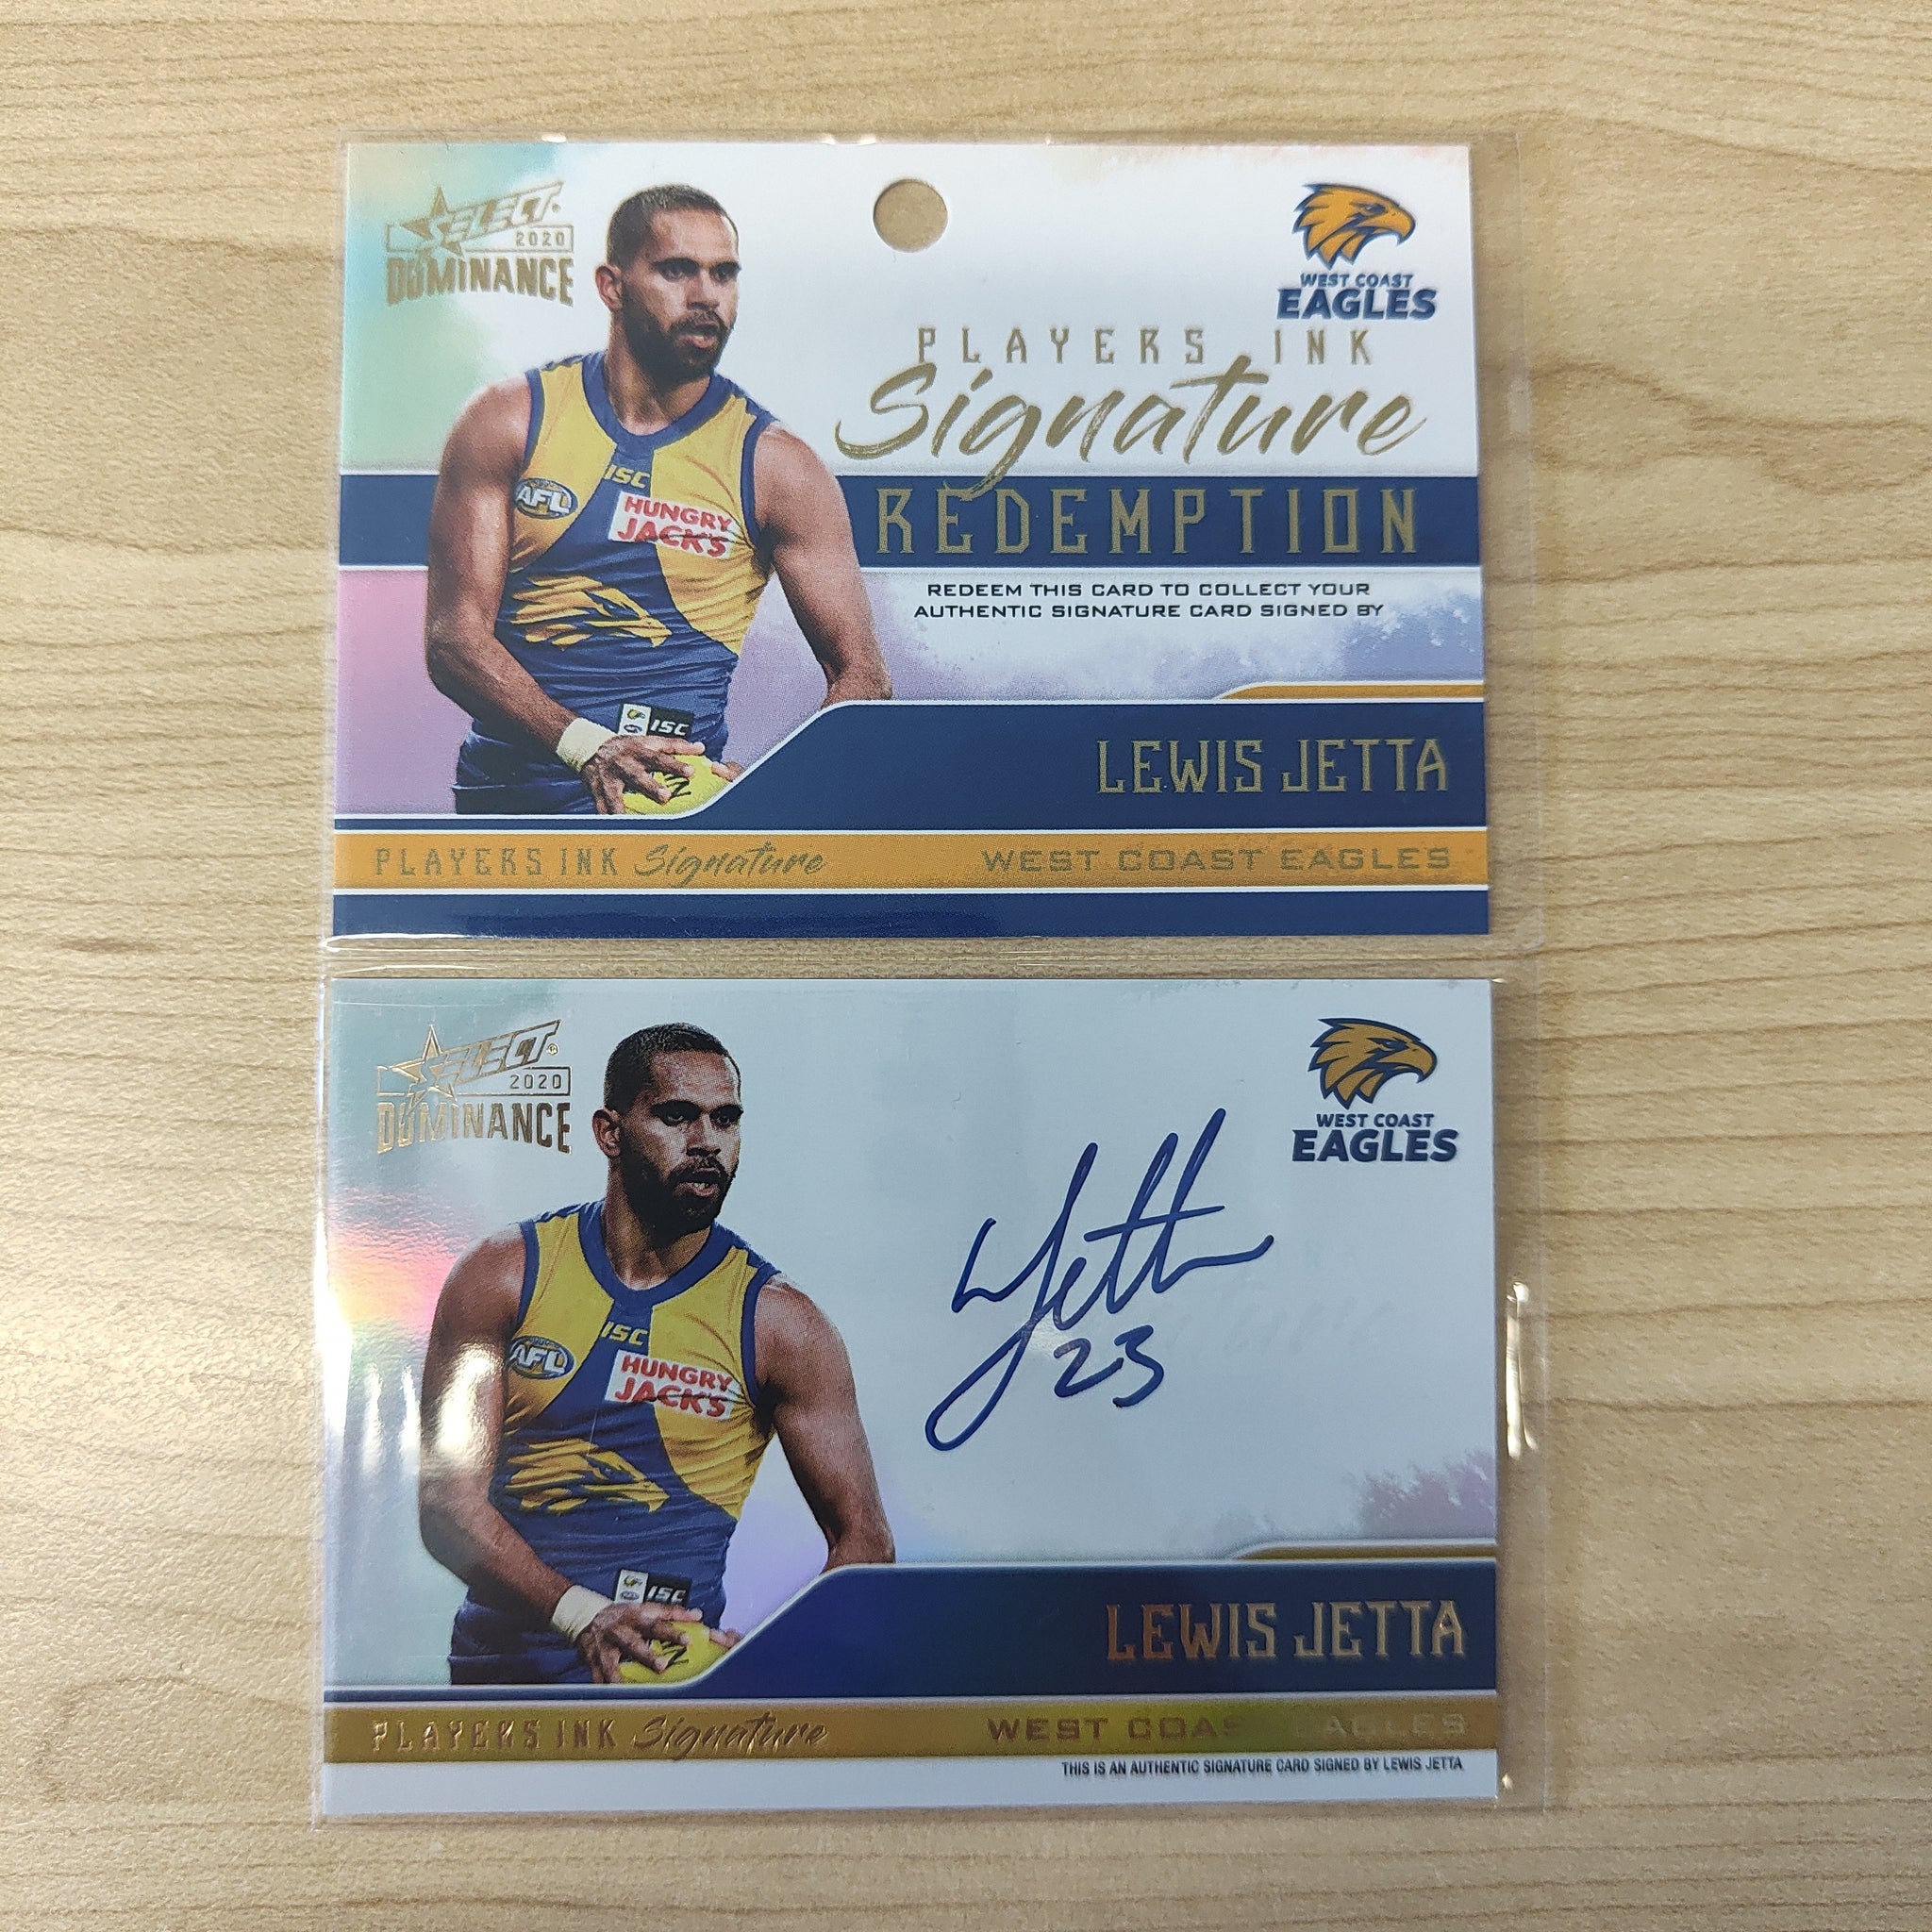 2020 Select Dominance Players Ink Signature Redemption Lewis Jetta West Coast No. 149/175